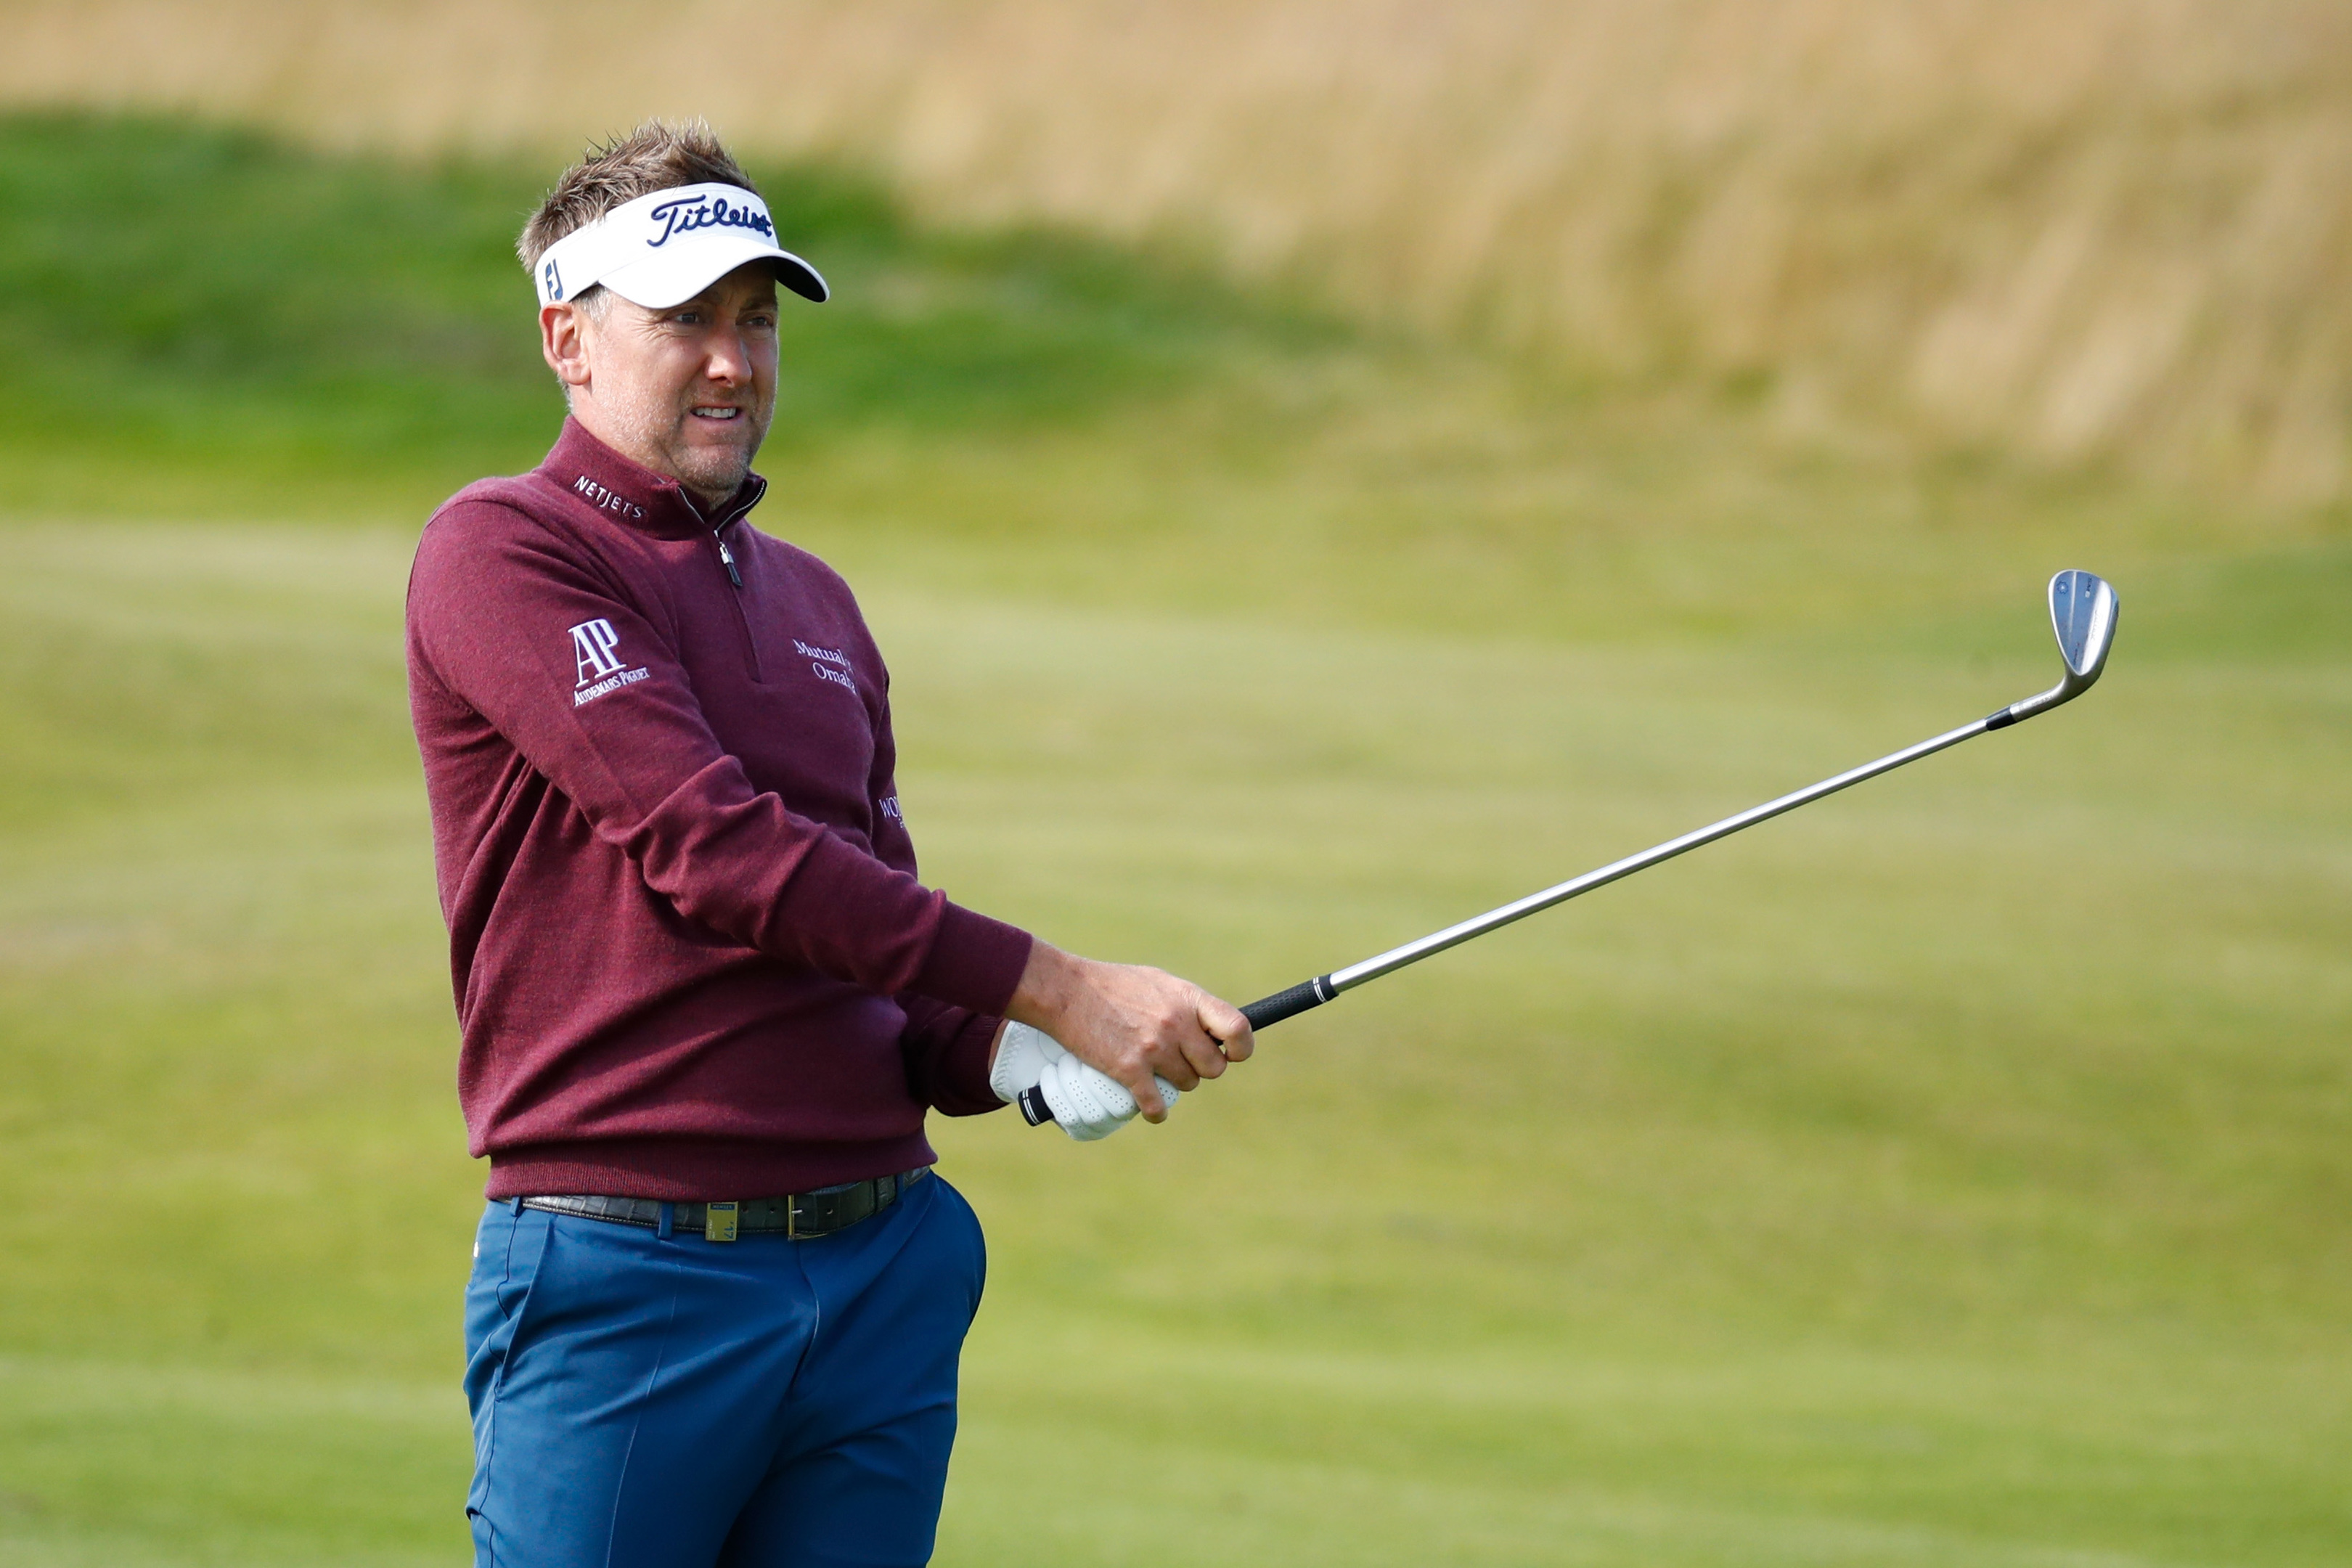 Ian Poulter made a strong startto the Aberdeen Asset Management Scottish Open, just two shots off the lead.